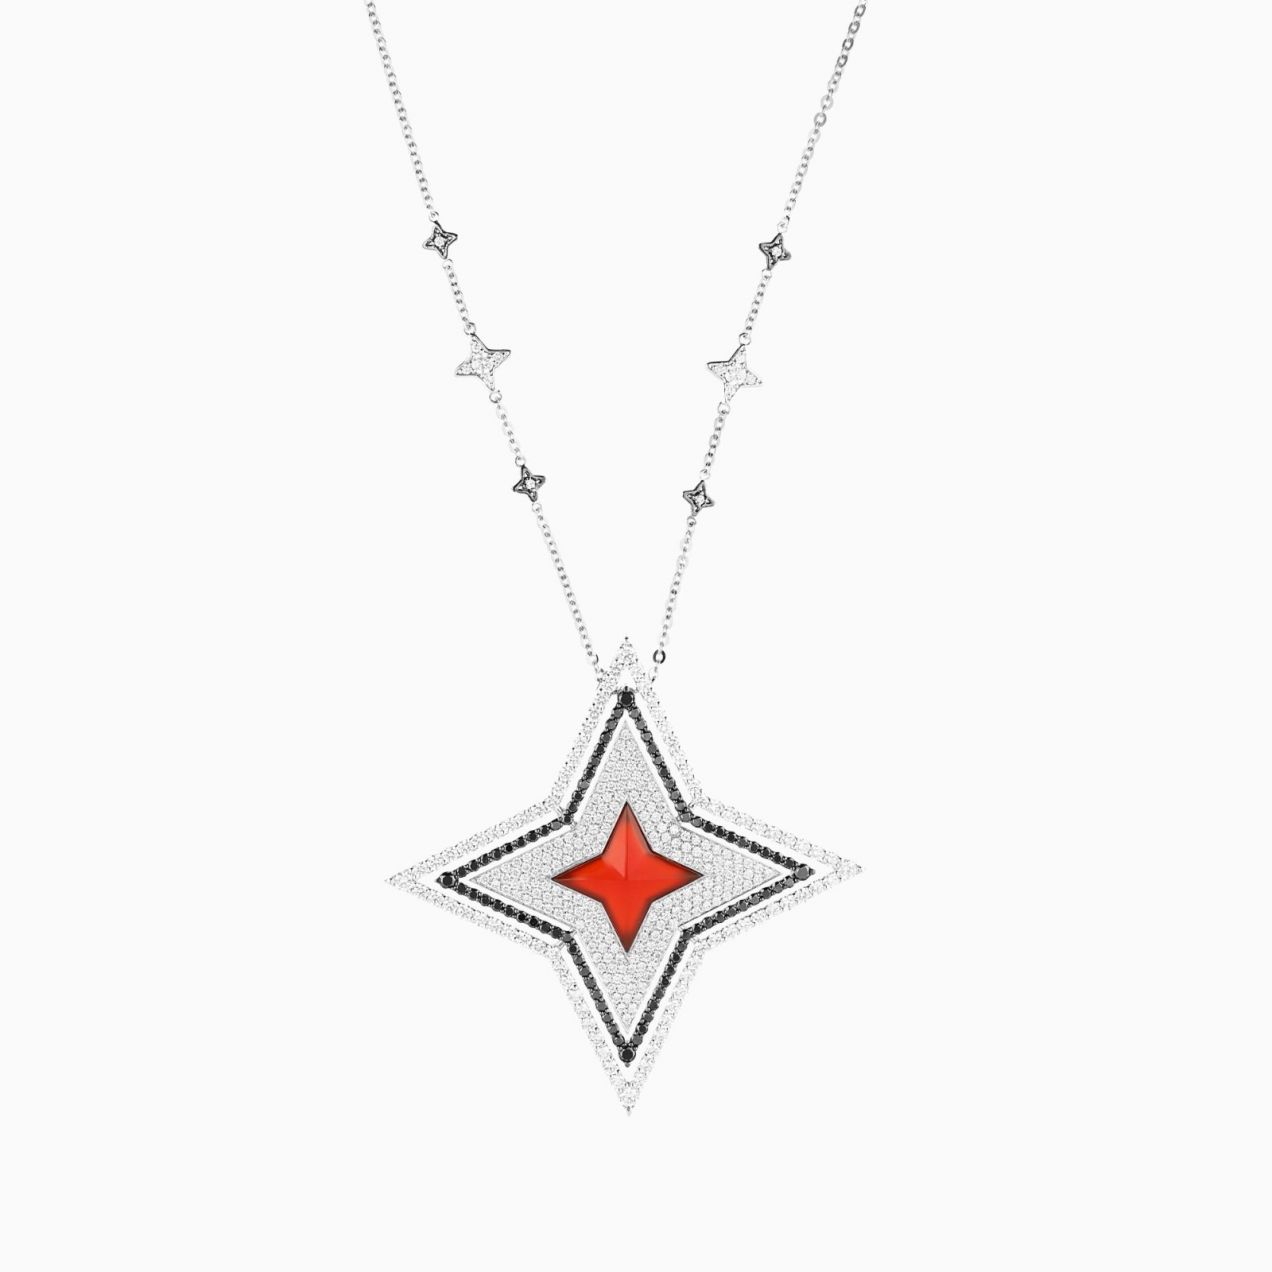 Star necklace in white gold and black rhodium gold with diamonds and red carnelian